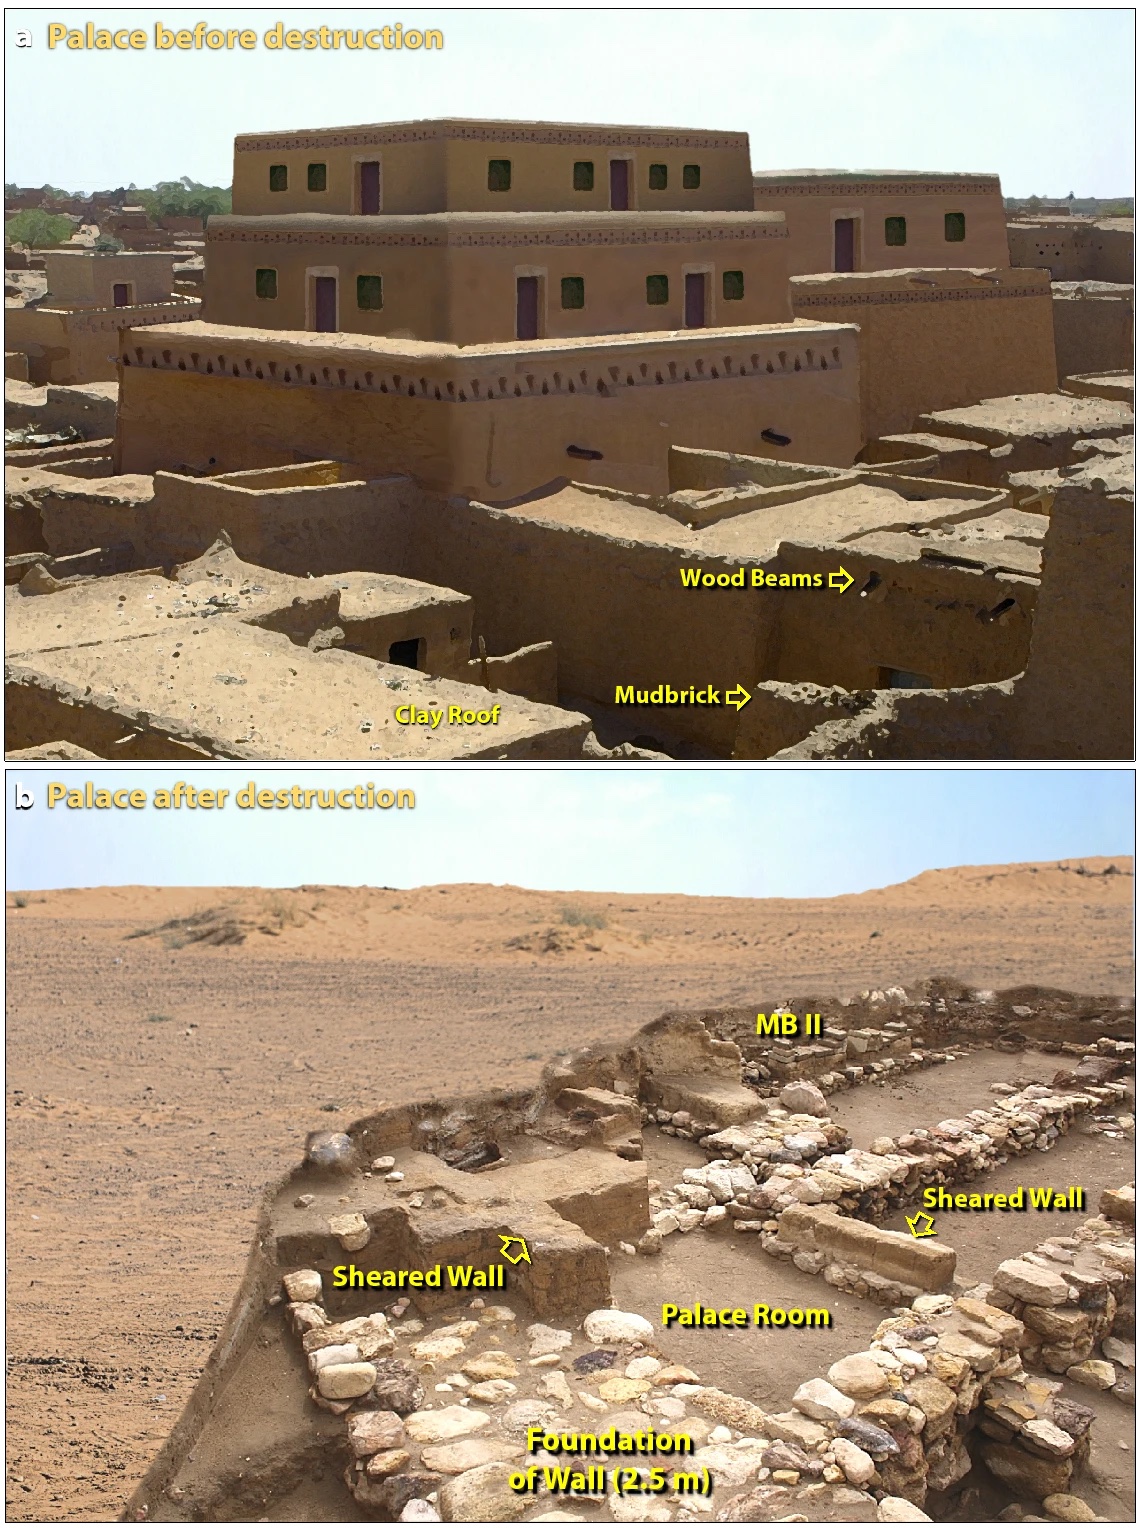 Image of an ancient palace